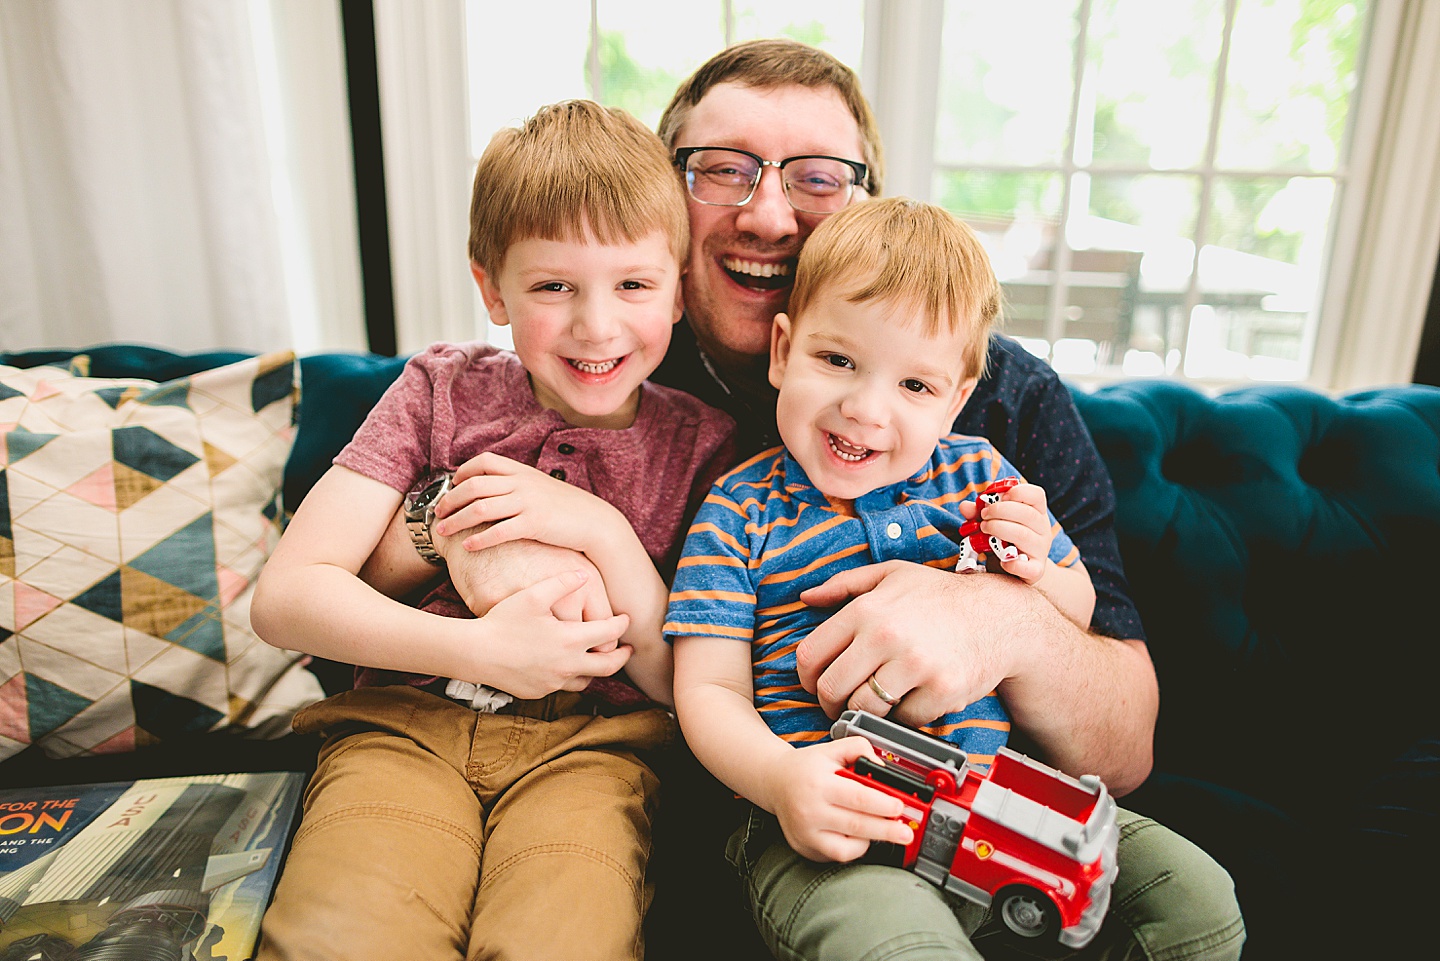 Dad smiling with sons on couch